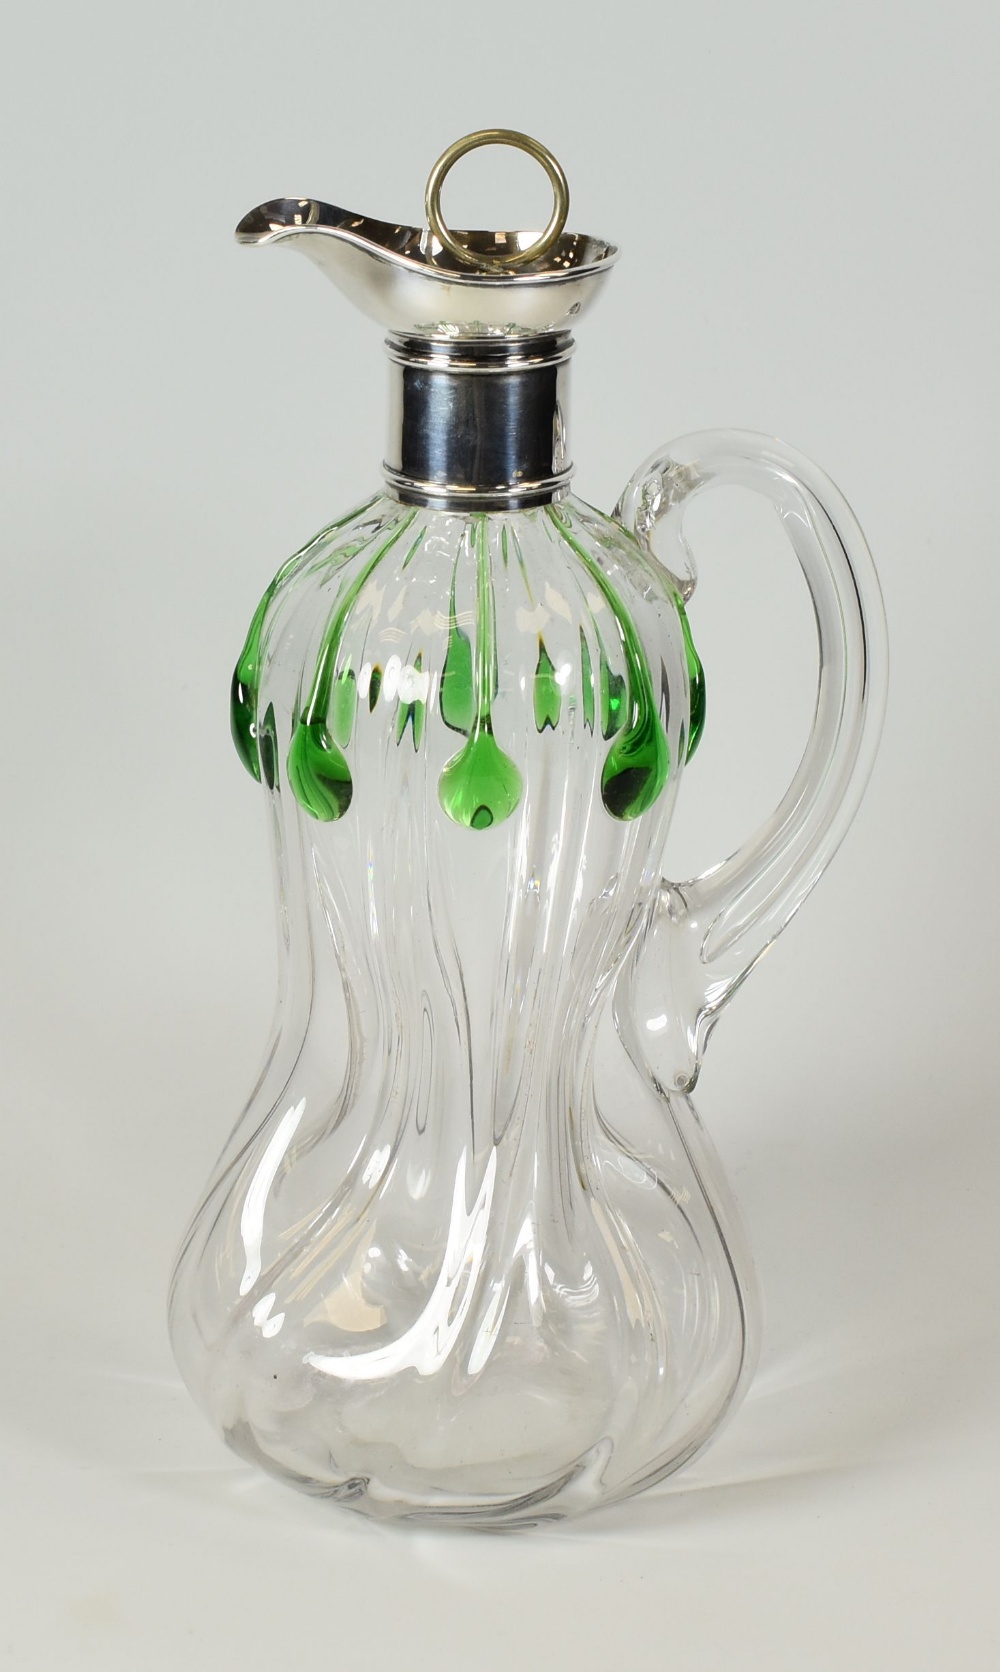 A GLASS DECANTER WITH SILVER COLLAR & SPOUT having a handle and swirling waisted body with green